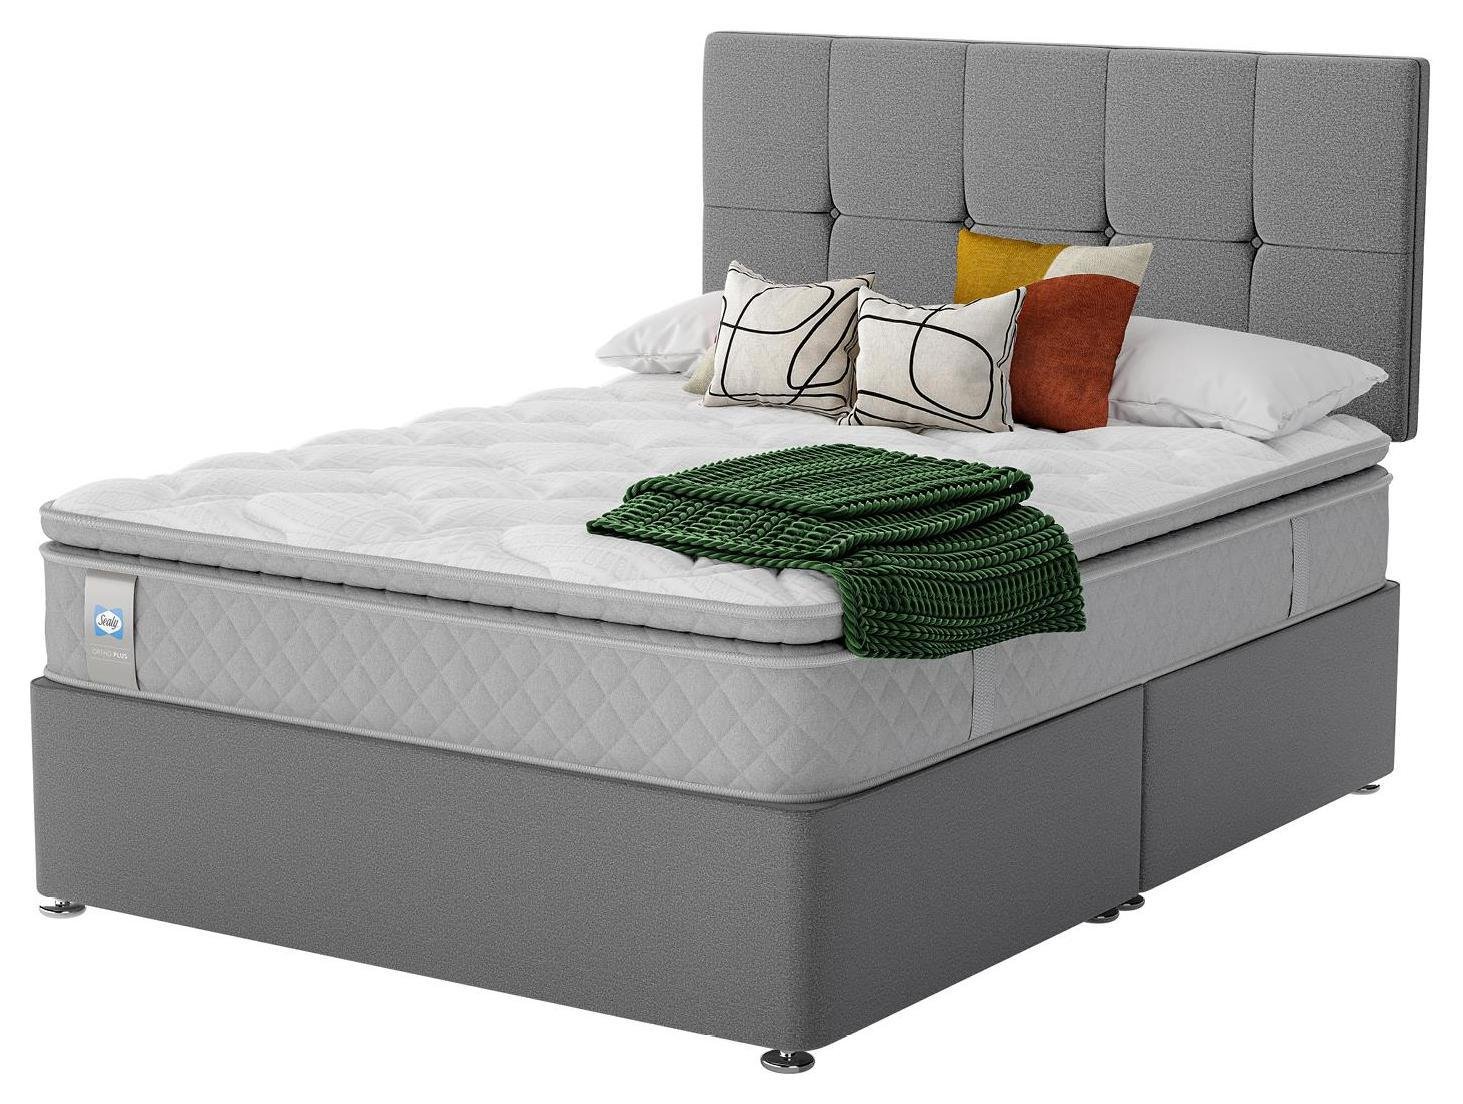 Sealy Abbot Pillowtop Double Divan Bed - Grey